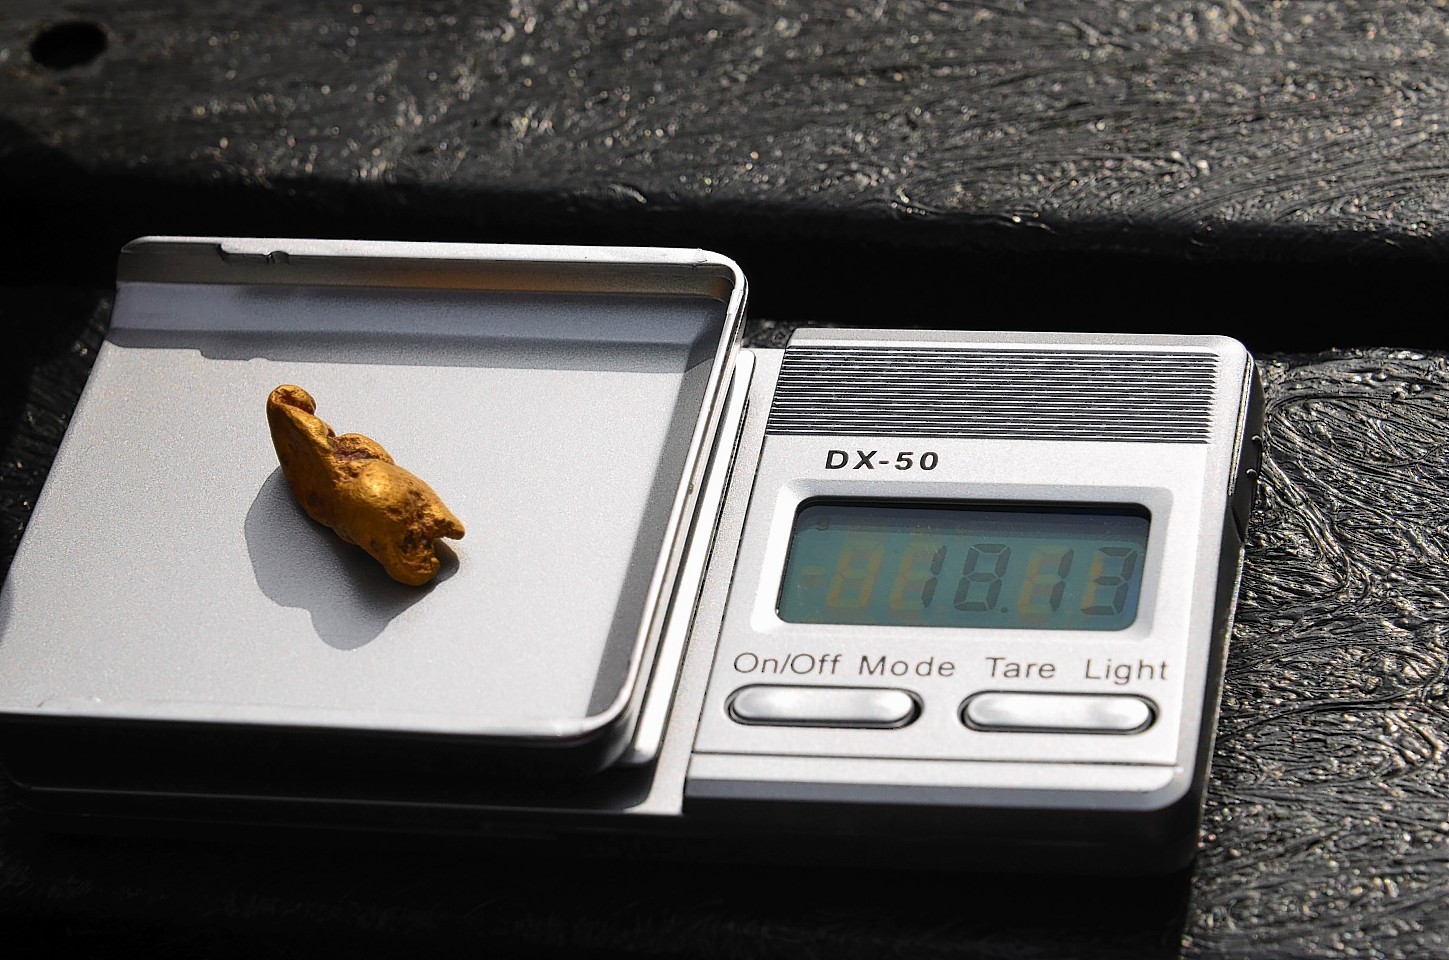 The 18.13 gsm gold nugget found in waters at Wanlockhead, Dumfries and Galloway